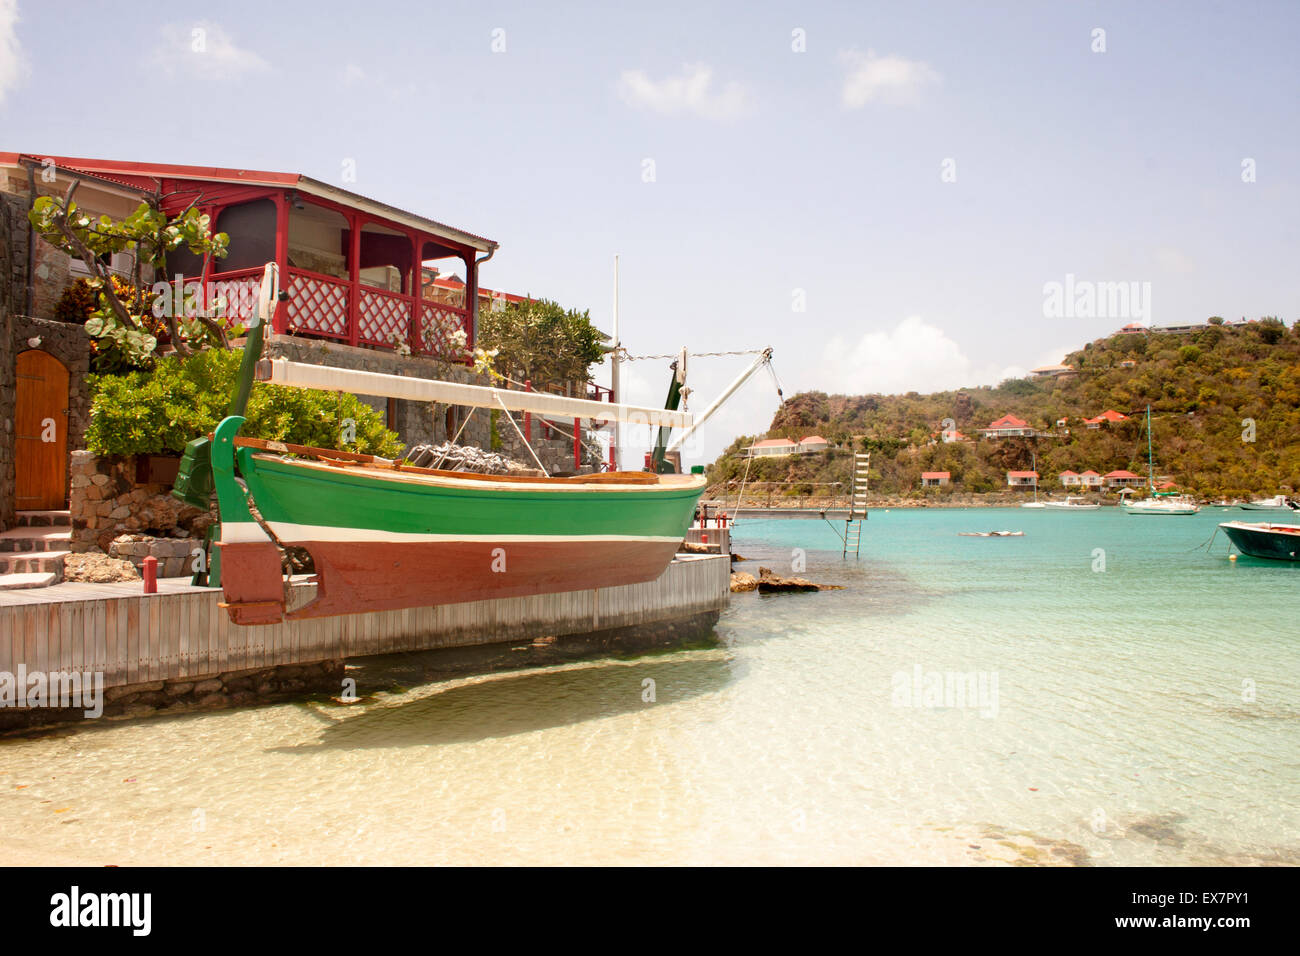 A beautiful green wooden boat docked at the famous Eden Rock Hotel in St. Barts Stock Photo